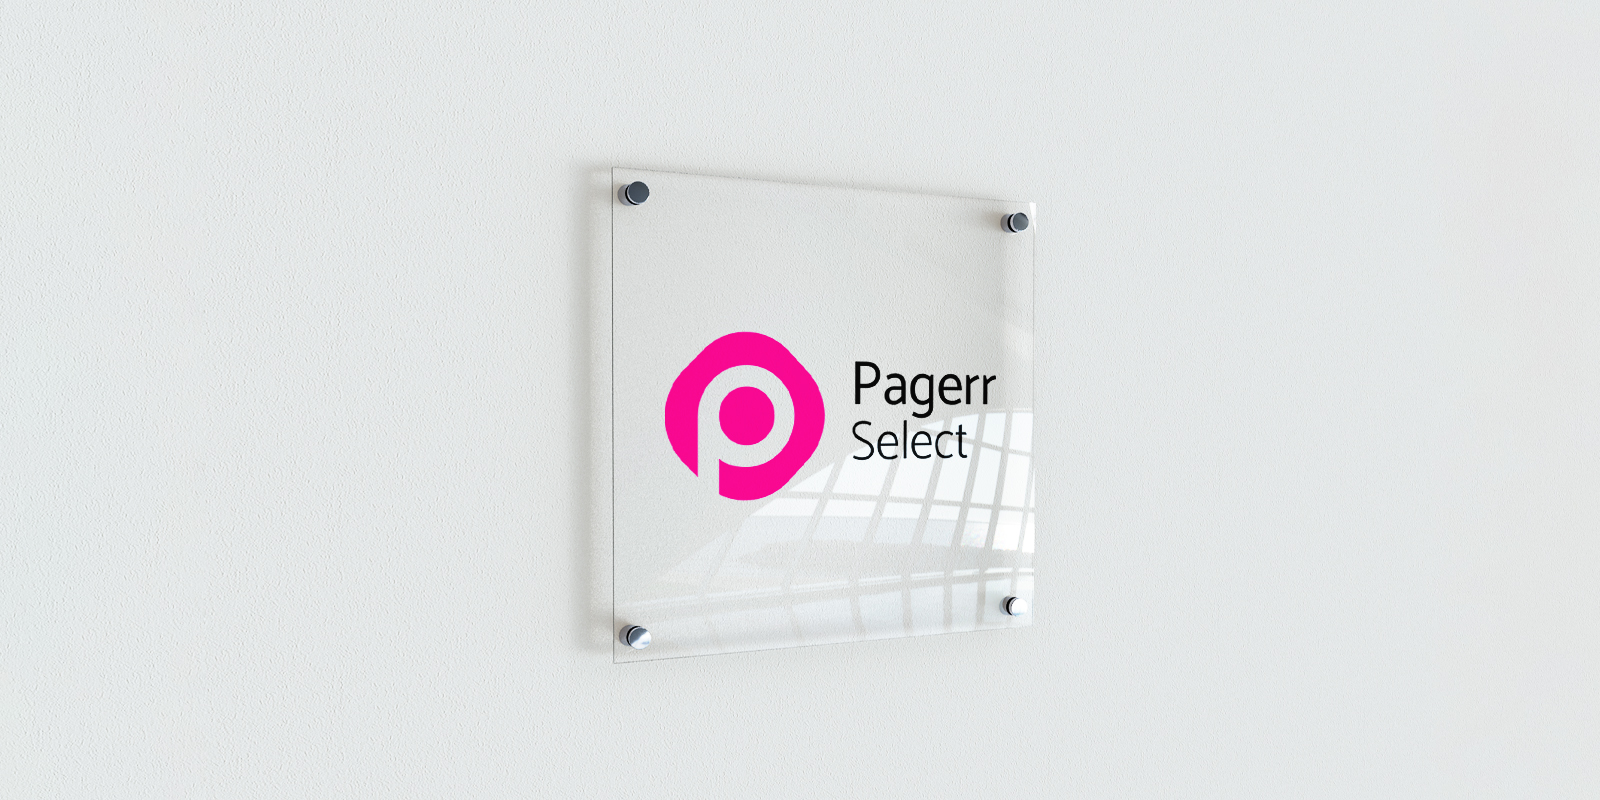 Acrylic signs in Melbourne - Print with Pagerr